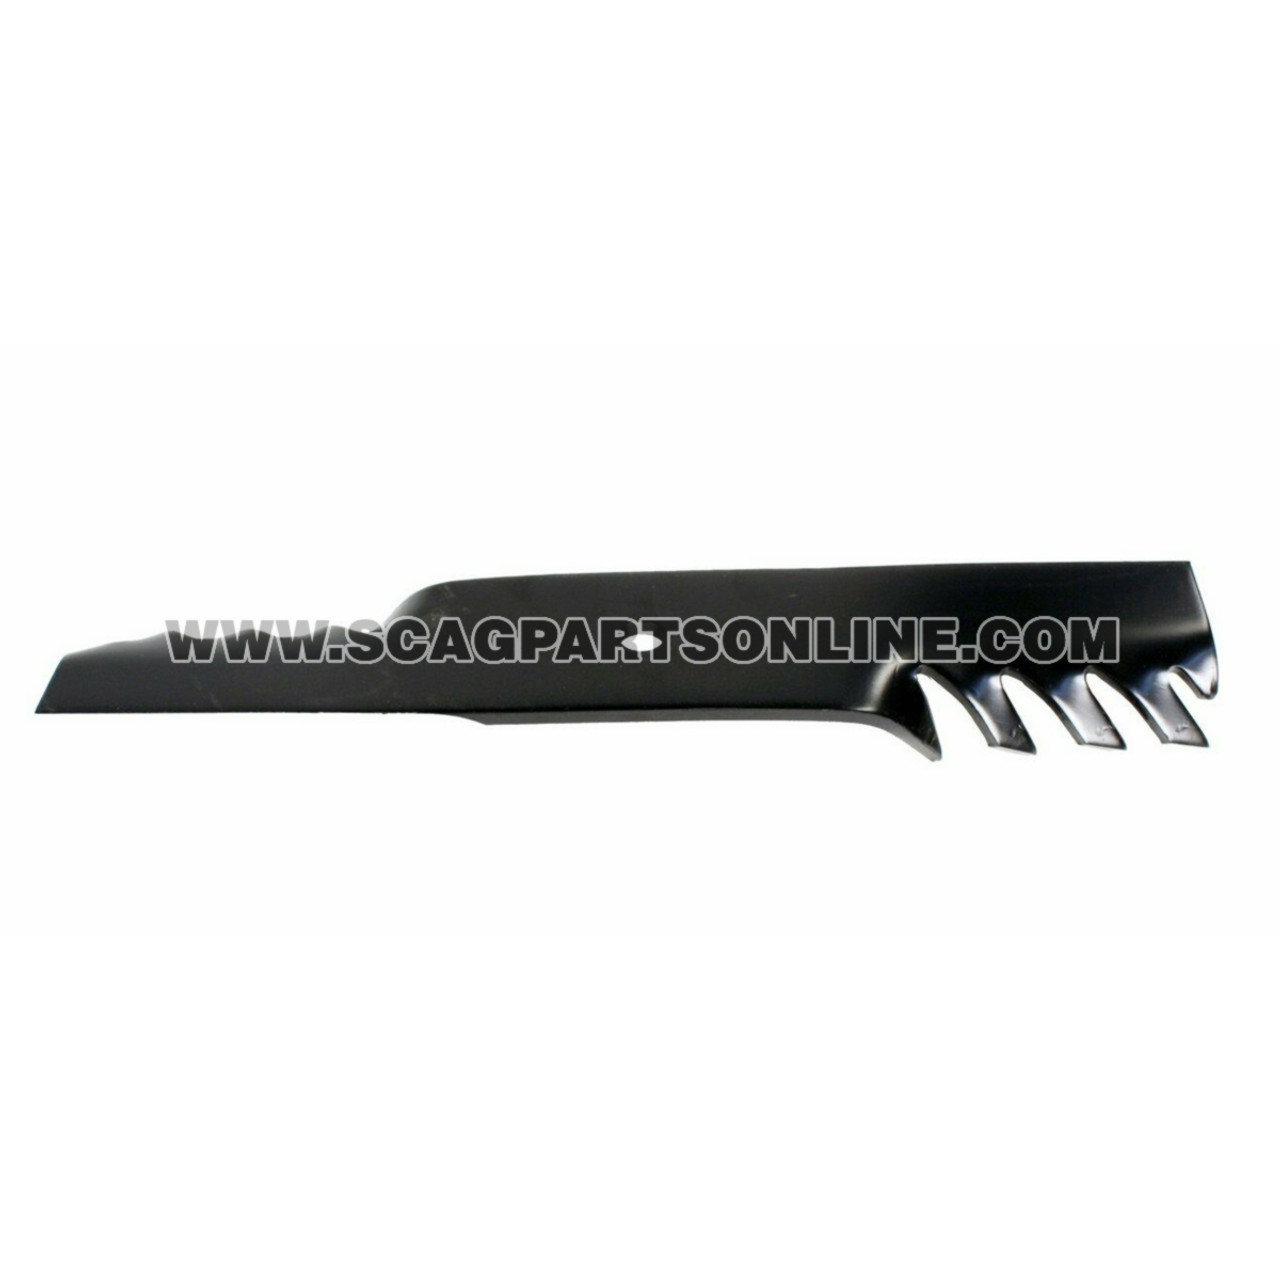 Scag 48 Blades Discounts Purchase